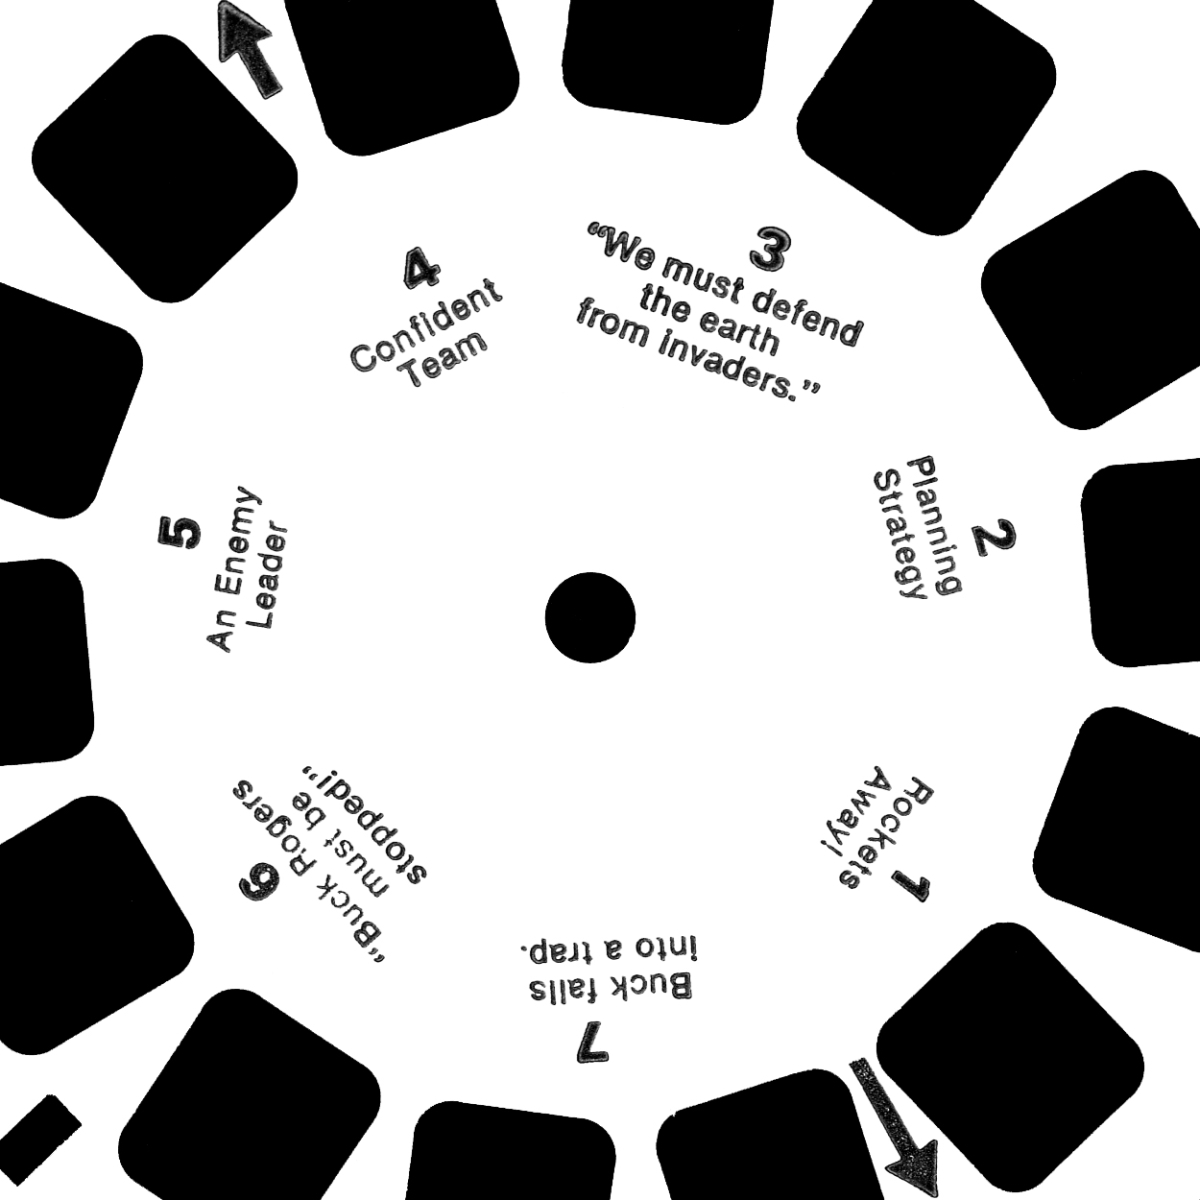 Large photographic image of black and white patterns made from scanning view master slides - this one from the Buck Rogers series: radial black rounded squares form an outer circle, and inside a numbered list from 1-7 circles a central small circle, each number has a caption, starting at the top right with 3: 'We must defend the Earth From Invaders'.